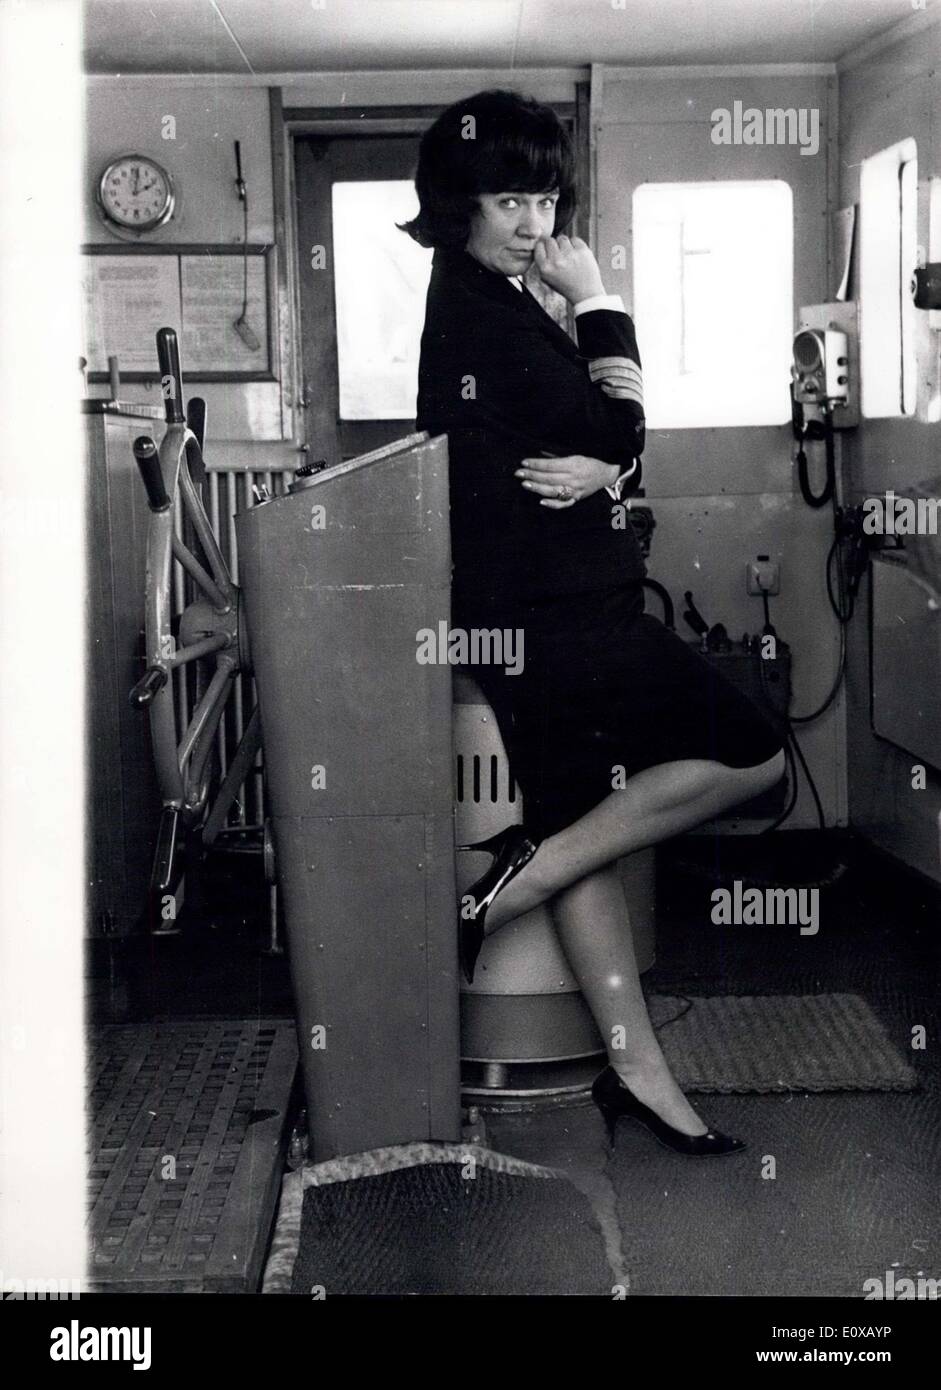 Feb. 28, 1966 - The Woman Captain: Danuta Walas is captain of the 500-tpon Polish cargo vessel Dziwozona - and at 35 is one of the world's three women captains (the others are Russian and Dutch) and has 18 men under her control. The men present no problems. But those dashed duck boards to tend to trap high heels, don't they? ''My Hair,''she says, ''gets blown all over the place. And my mascara runs mt eyes water in to wind''Apart from that, there is just one other problems: Danuta's 37-year old husband Czeslaw, who is soion to be second mate on a new 3,000-ton Polish Ship Stock Photo